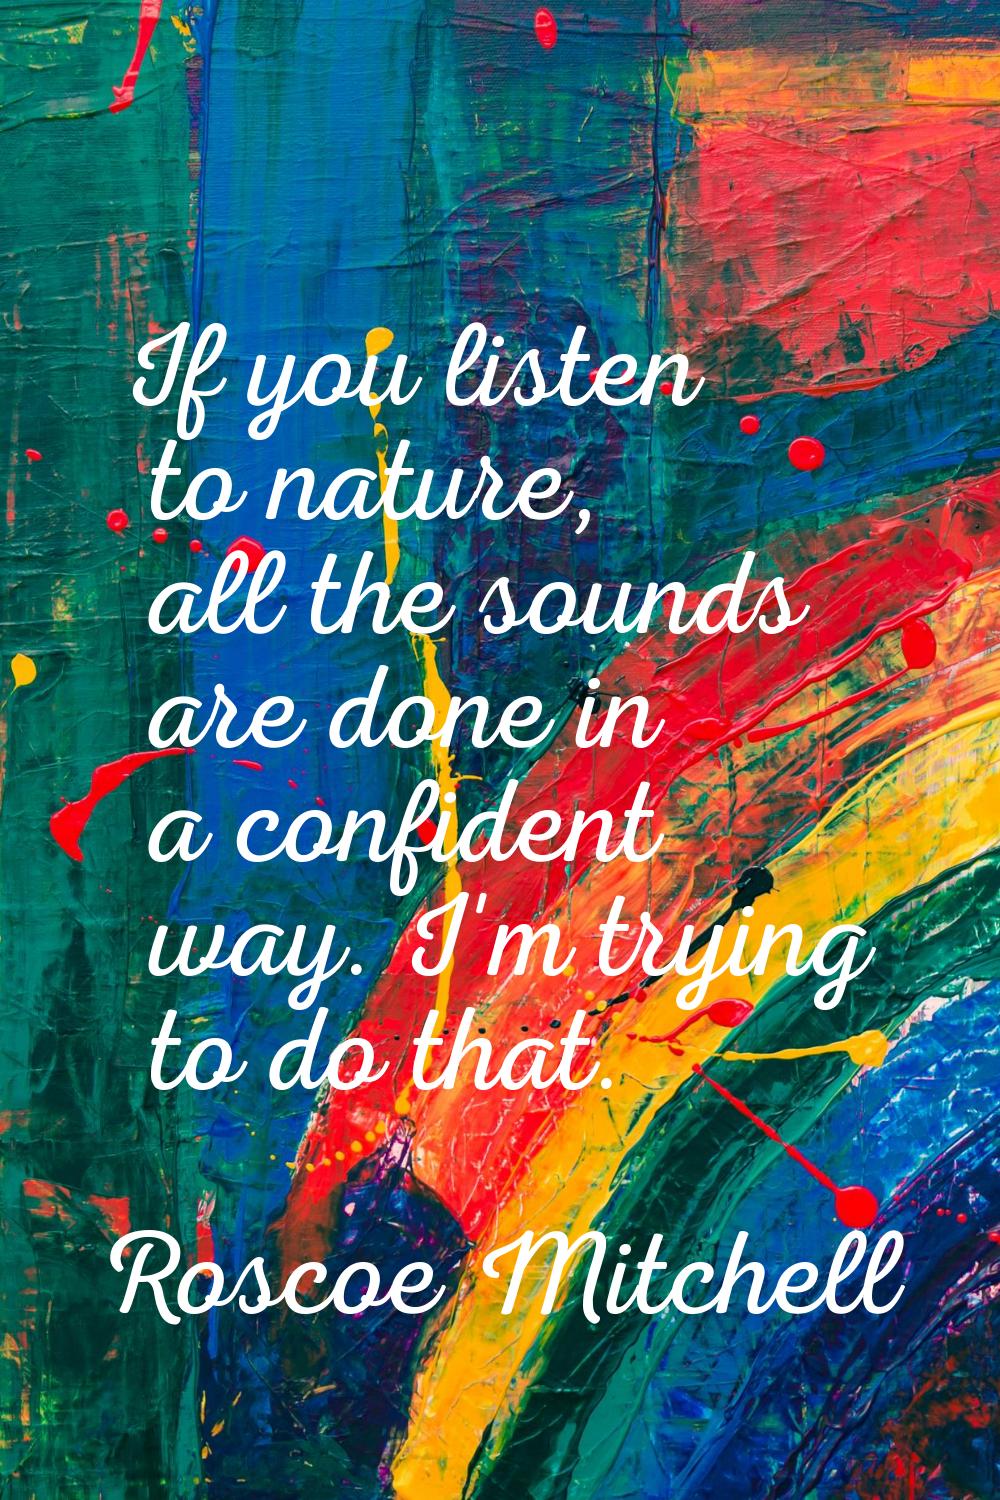 If you listen to nature, all the sounds are done in a confident way. I'm trying to do that.